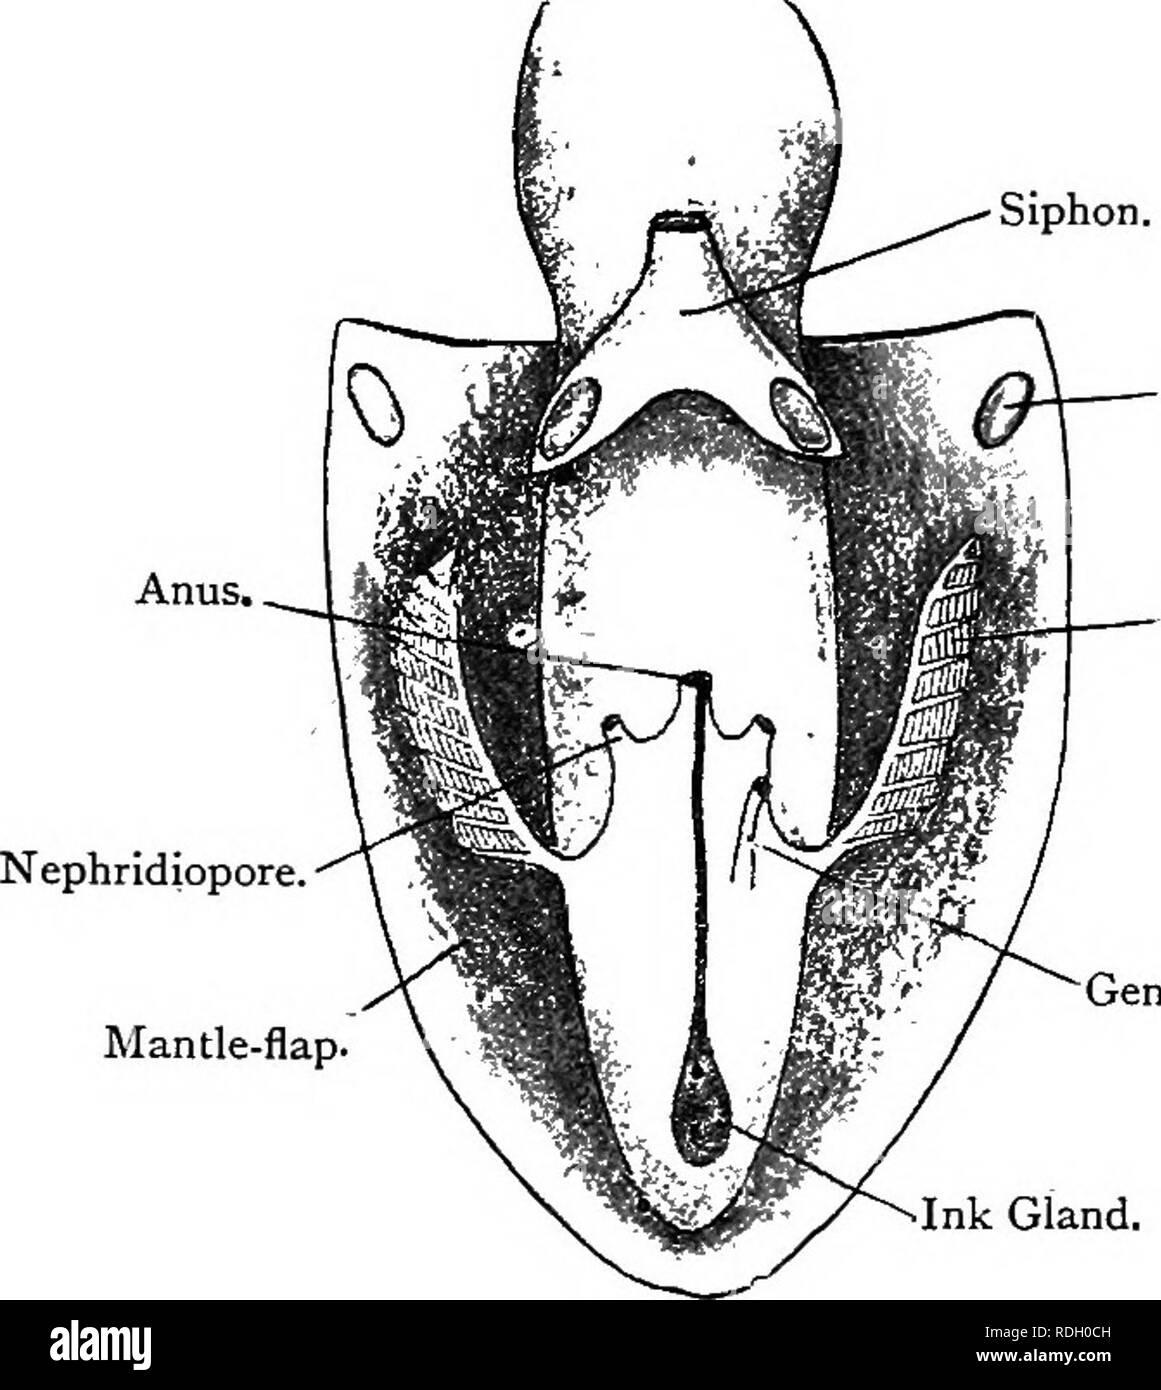 . Elementary text-book of zoology. 278 MOLLUSC A. The mouth leads through the jaws into a buccal chamher which contains a rasping odontophore of essentially the same ^^ nature as that of the snail. A duct from a pair of salivary glands opens into the buccal chamber. The oesophagus leads back some way to the stomach, a large rounded sac.  From close to the junction of stomach and oesophagus the intestine passes forwards and downwards to the anus, and a small saccular cacum opens at the same point. Here also open the paired ducts Fig. 196.—Ventral View of Sepia Officinalis with Mantle-Cavity Cu Stock Photo